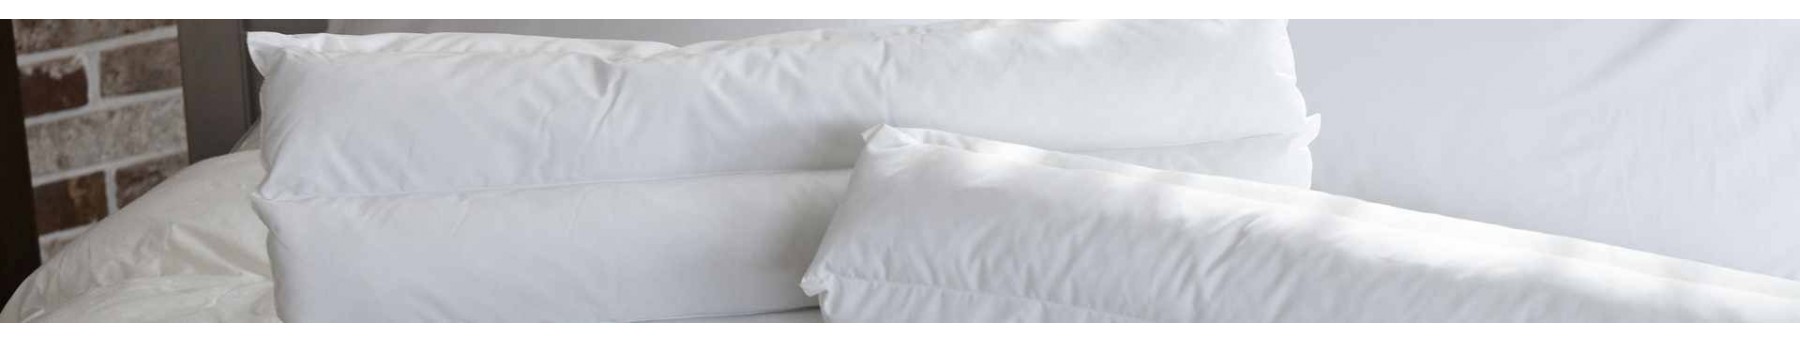 Best price on firm pillows for neck or head support, suits all sleeper